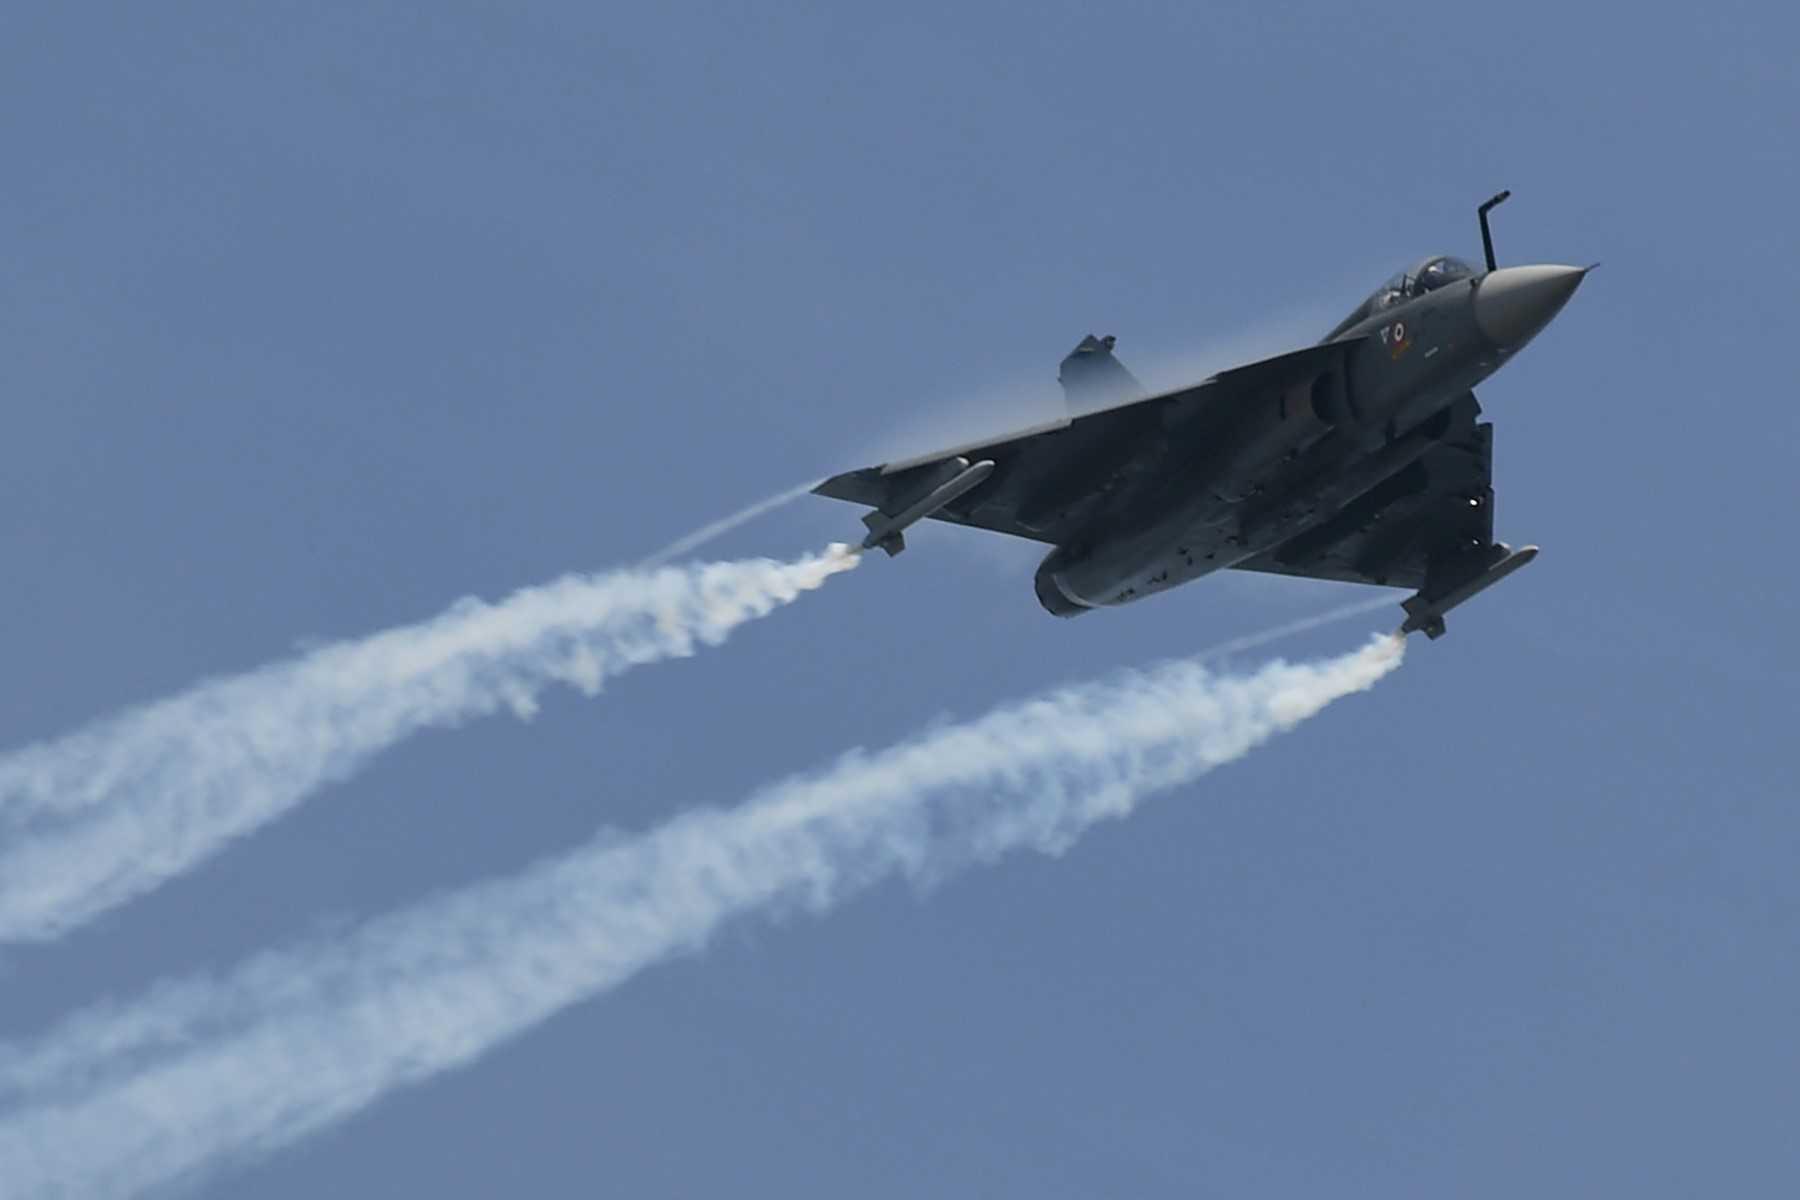 An Indian Air Force Tejas light combat aircraft flies past during a preview of the Singapore Airshow in Singapore on Feb 13. Photo: AFP